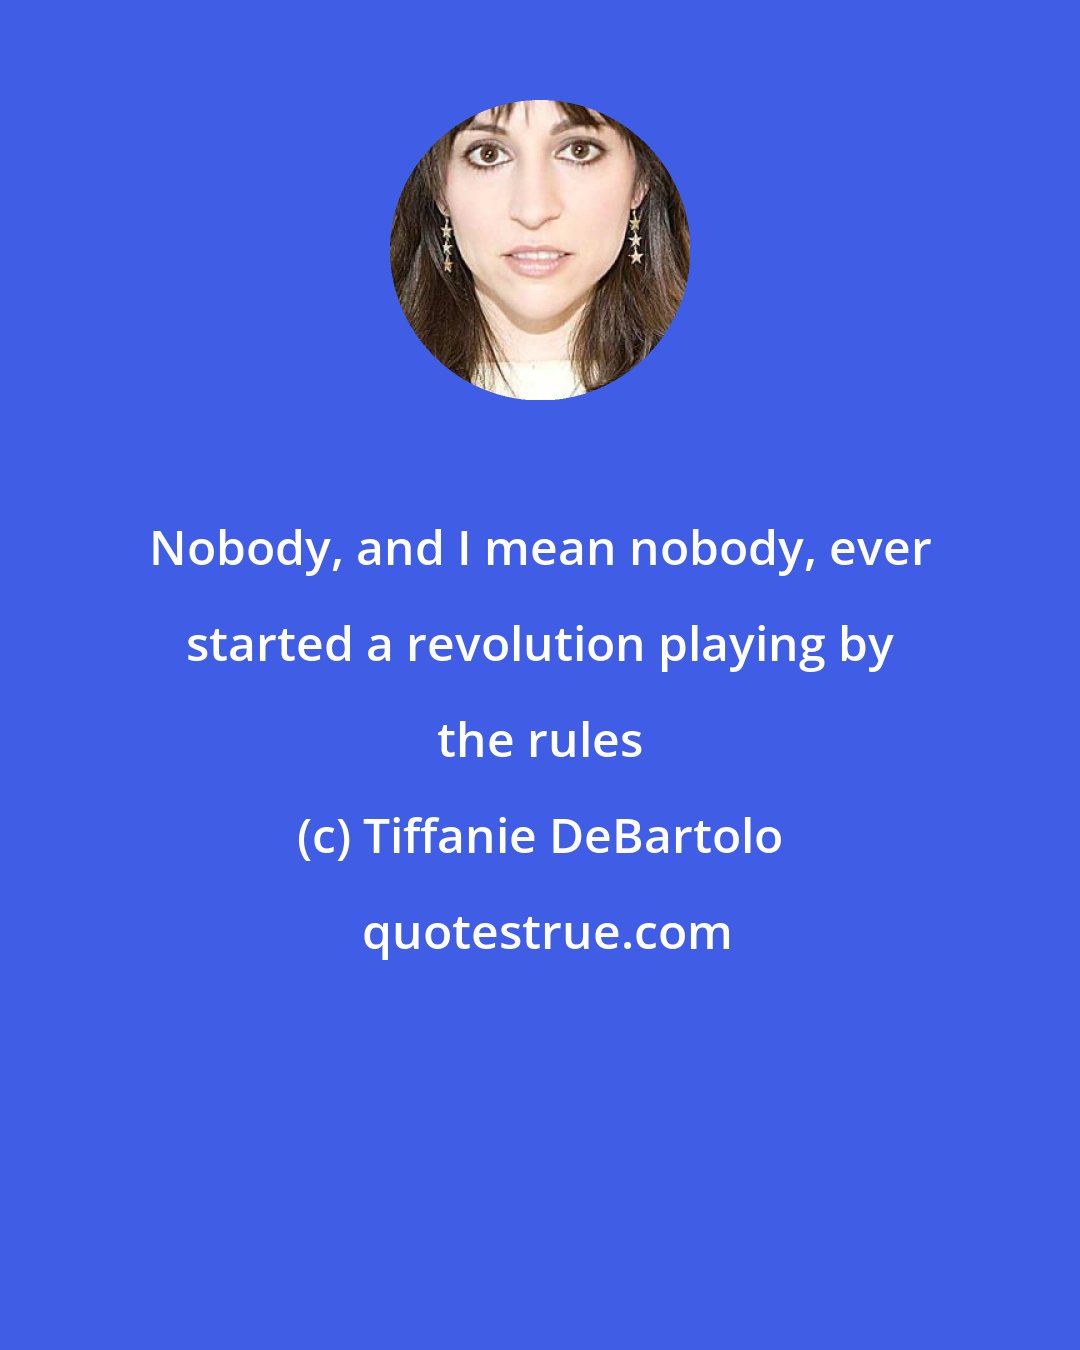 Tiffanie DeBartolo: Nobody, and I mean nobody, ever started a revolution playing by the rules